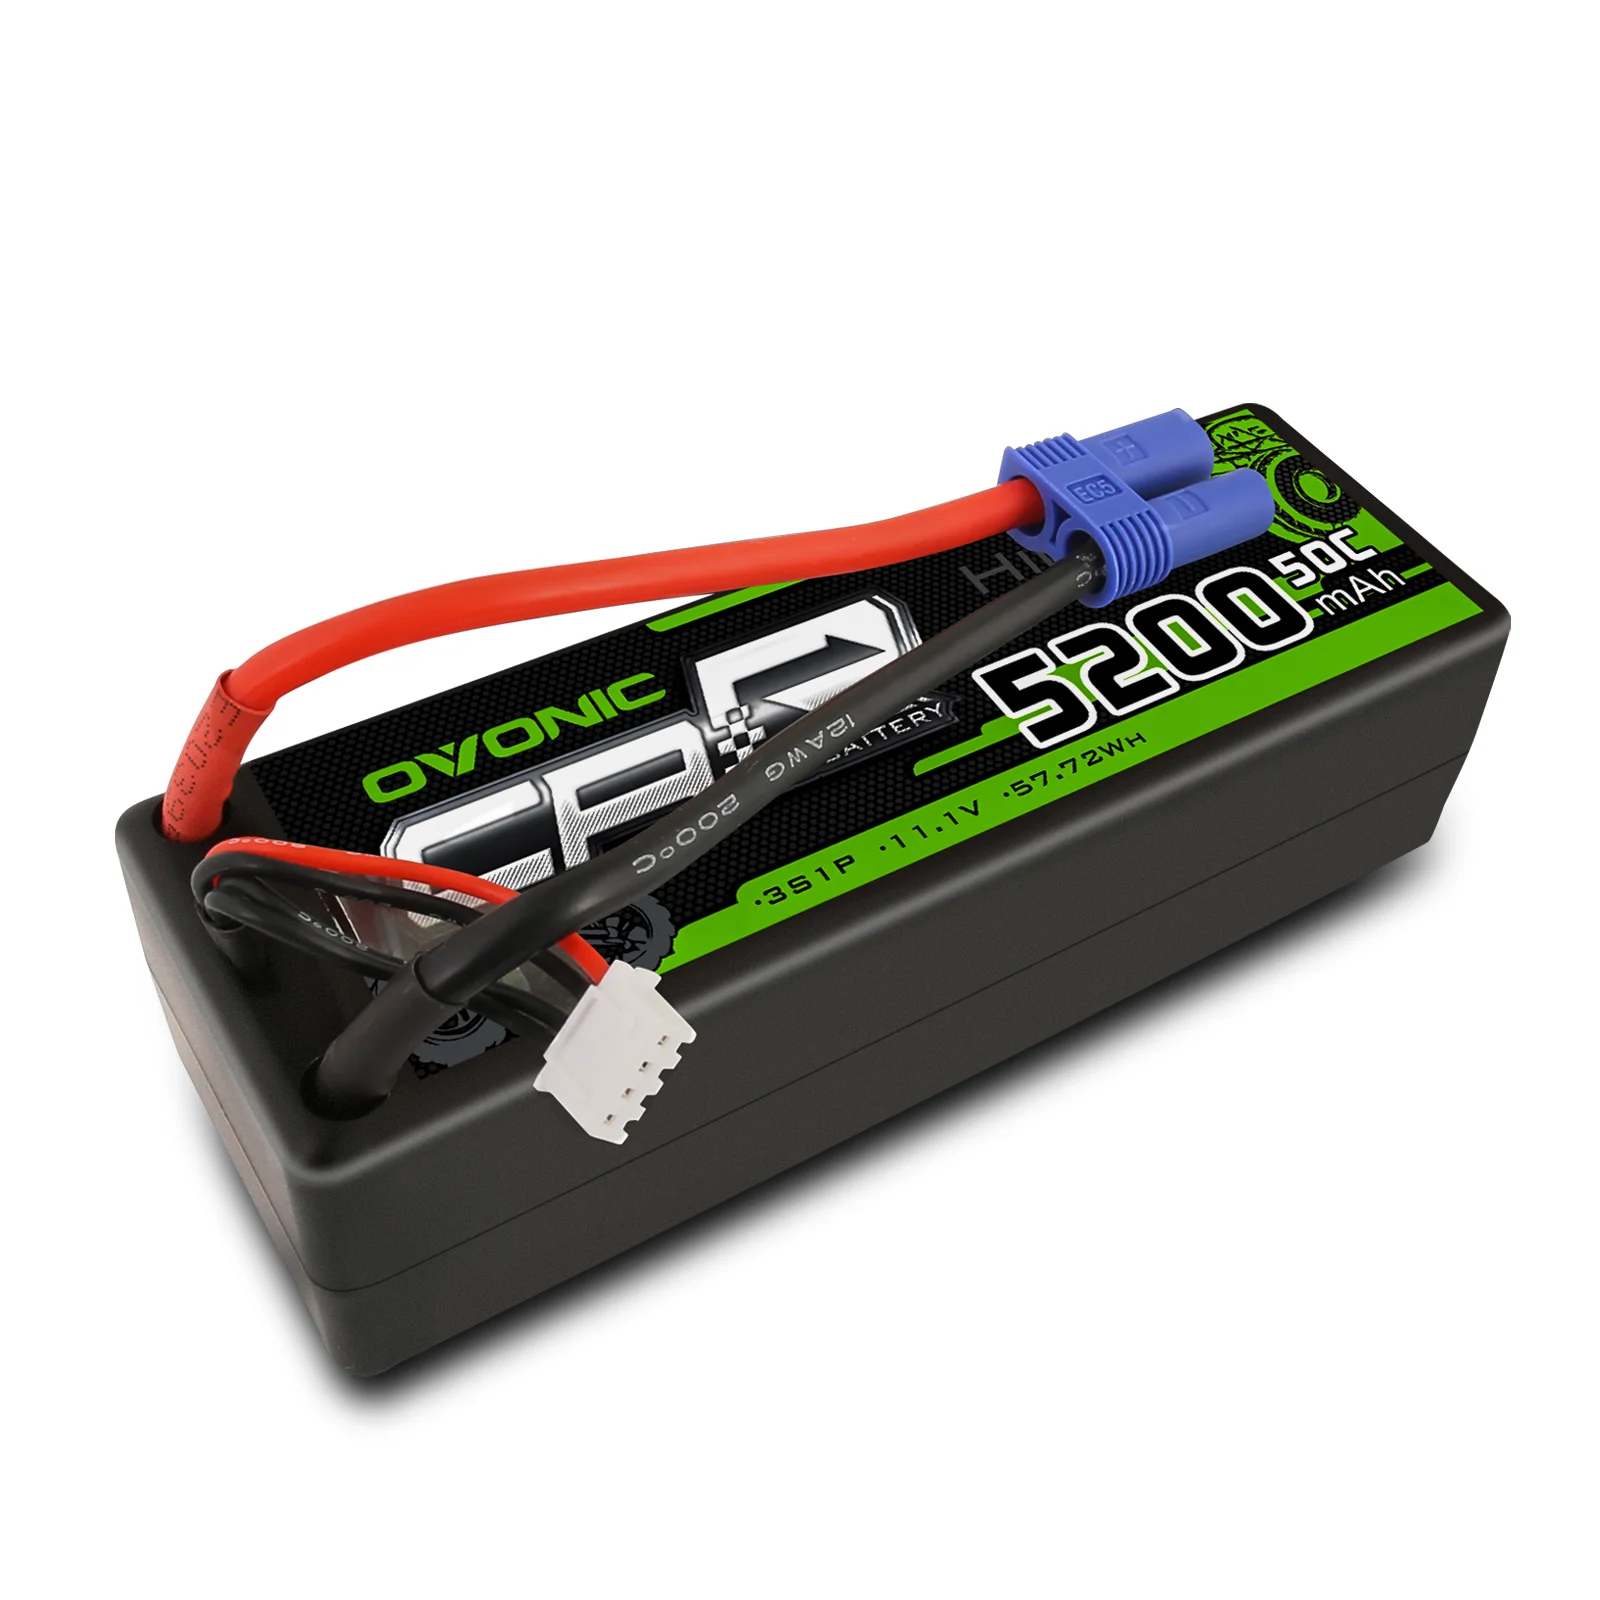 Ovonic 5200mAh 3S Lipo Battery 11.1V 50C Hardcase With EC5 Plug For Arrma 3S & 6S for 1:10& 1:8& 1:7 scale RC truck/buggy etc